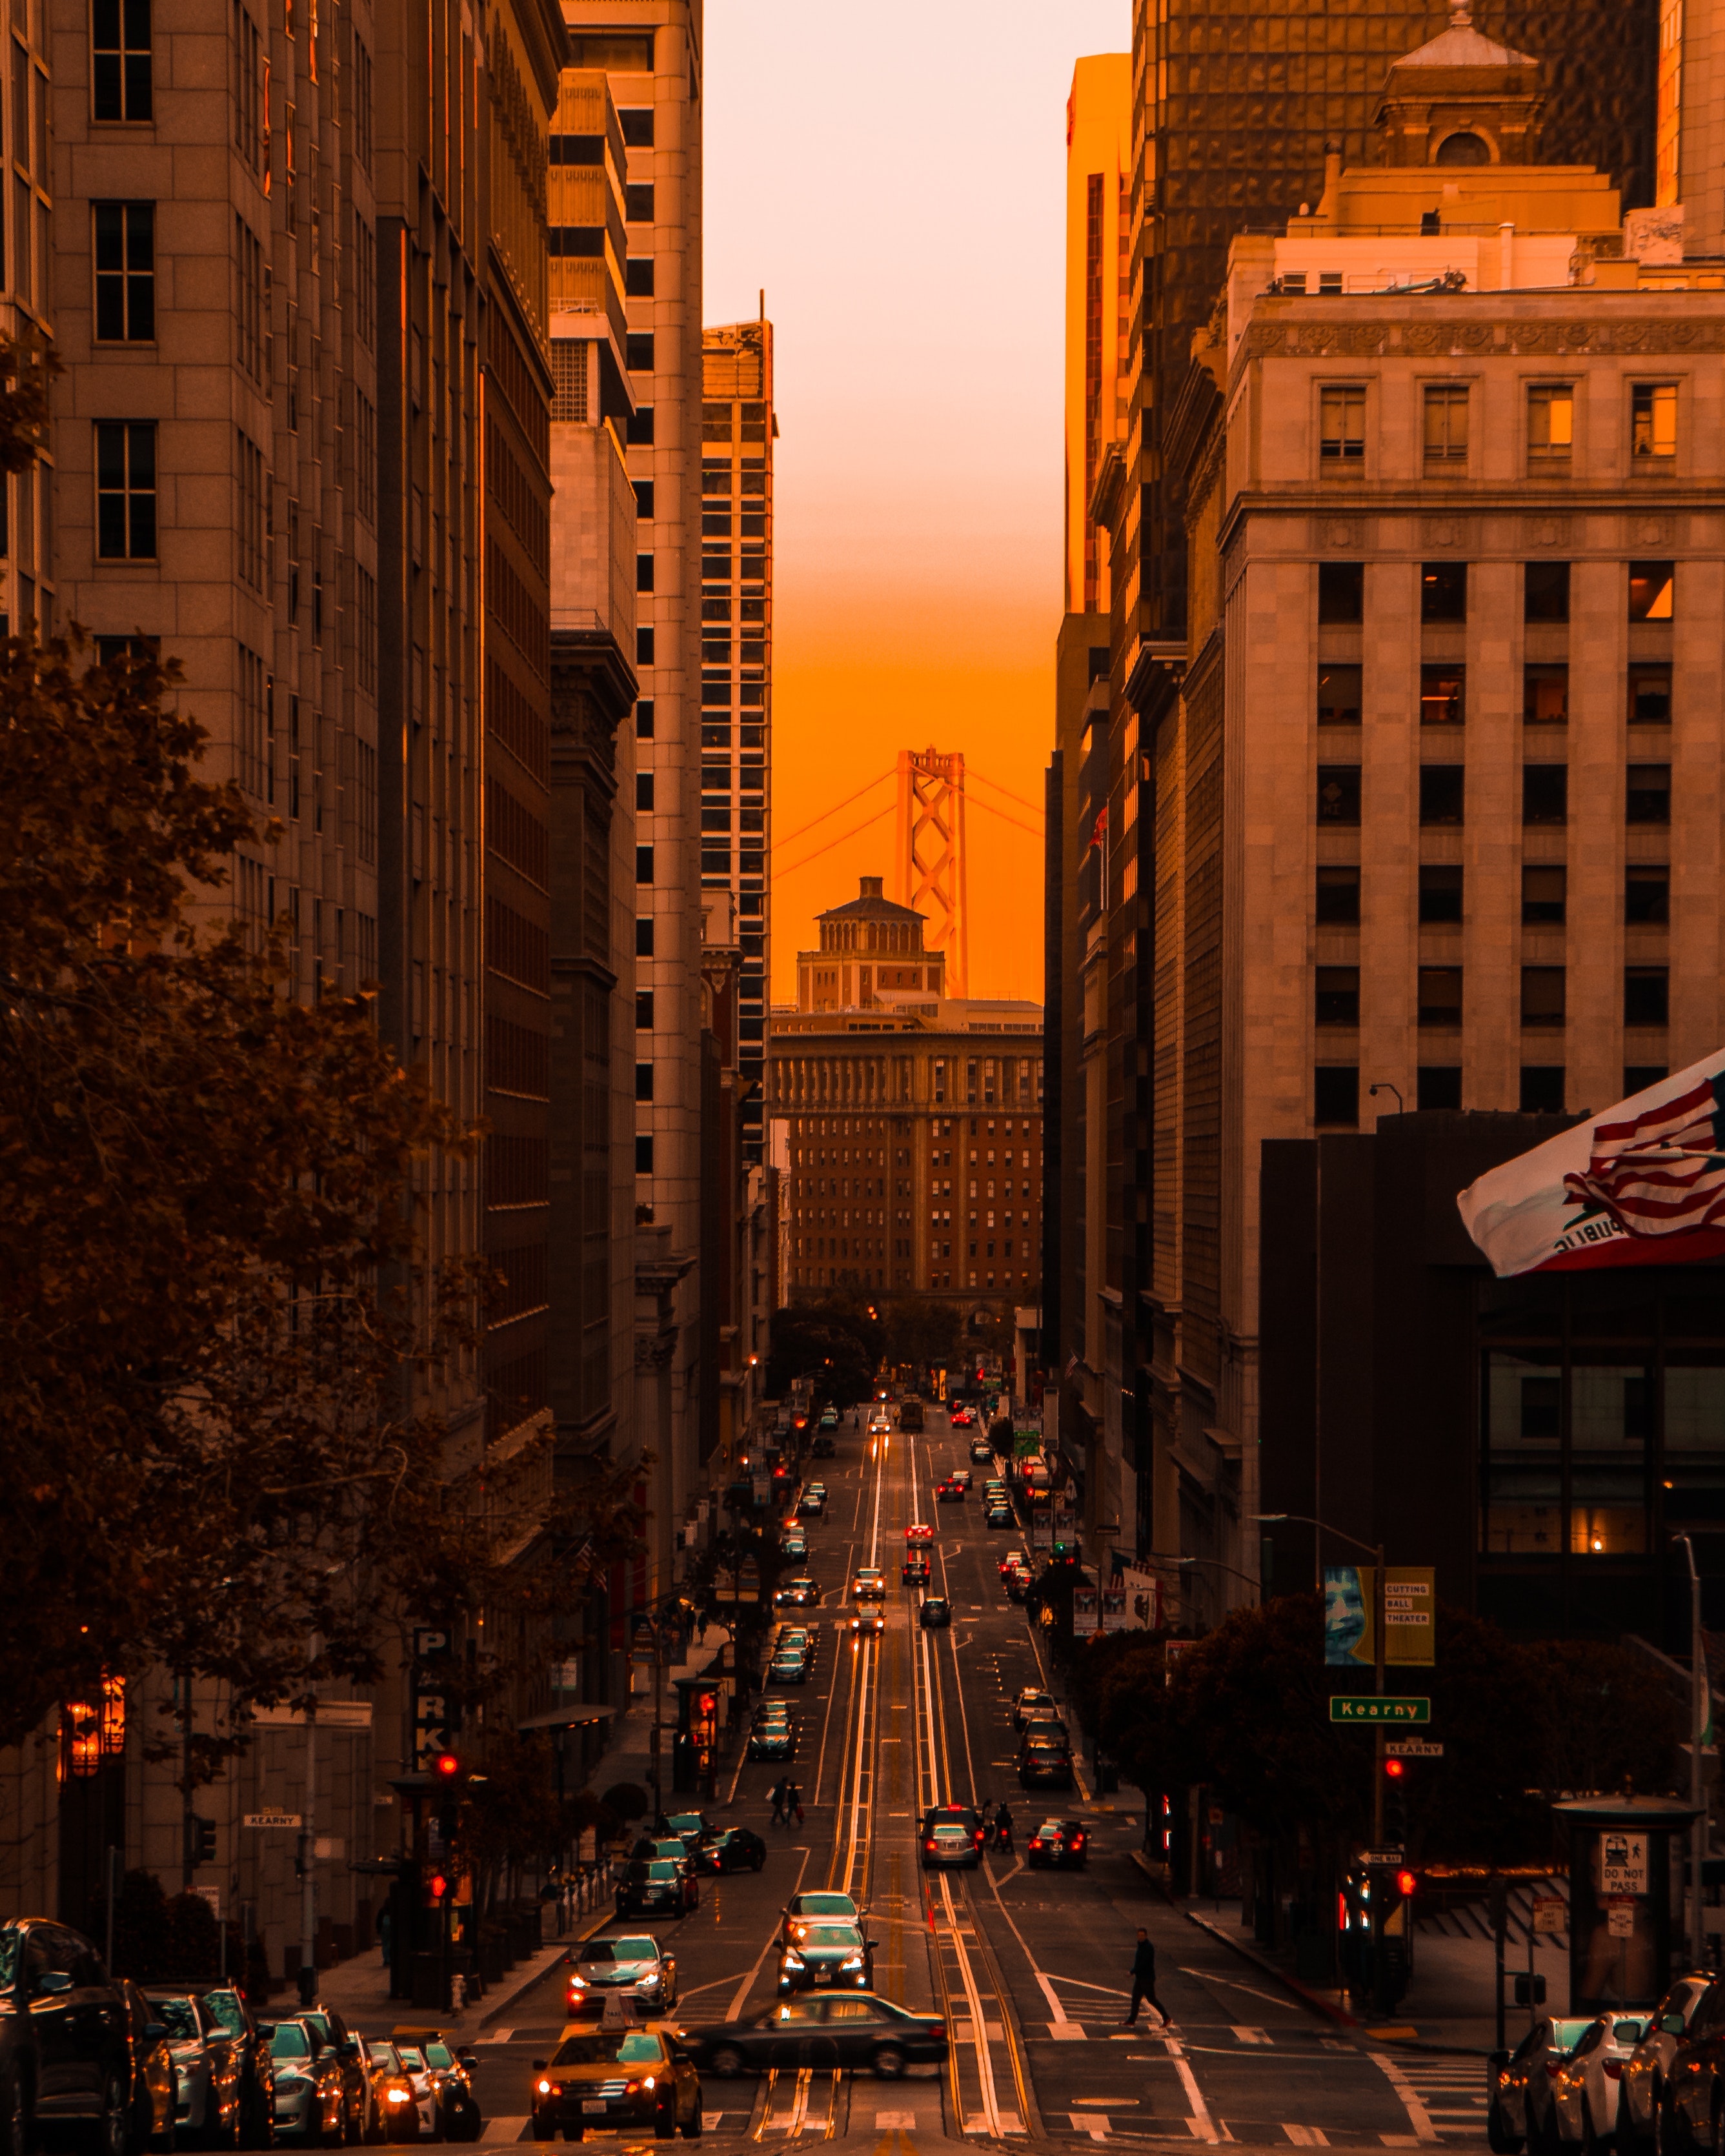 A road between two high-rise buildings during sunset